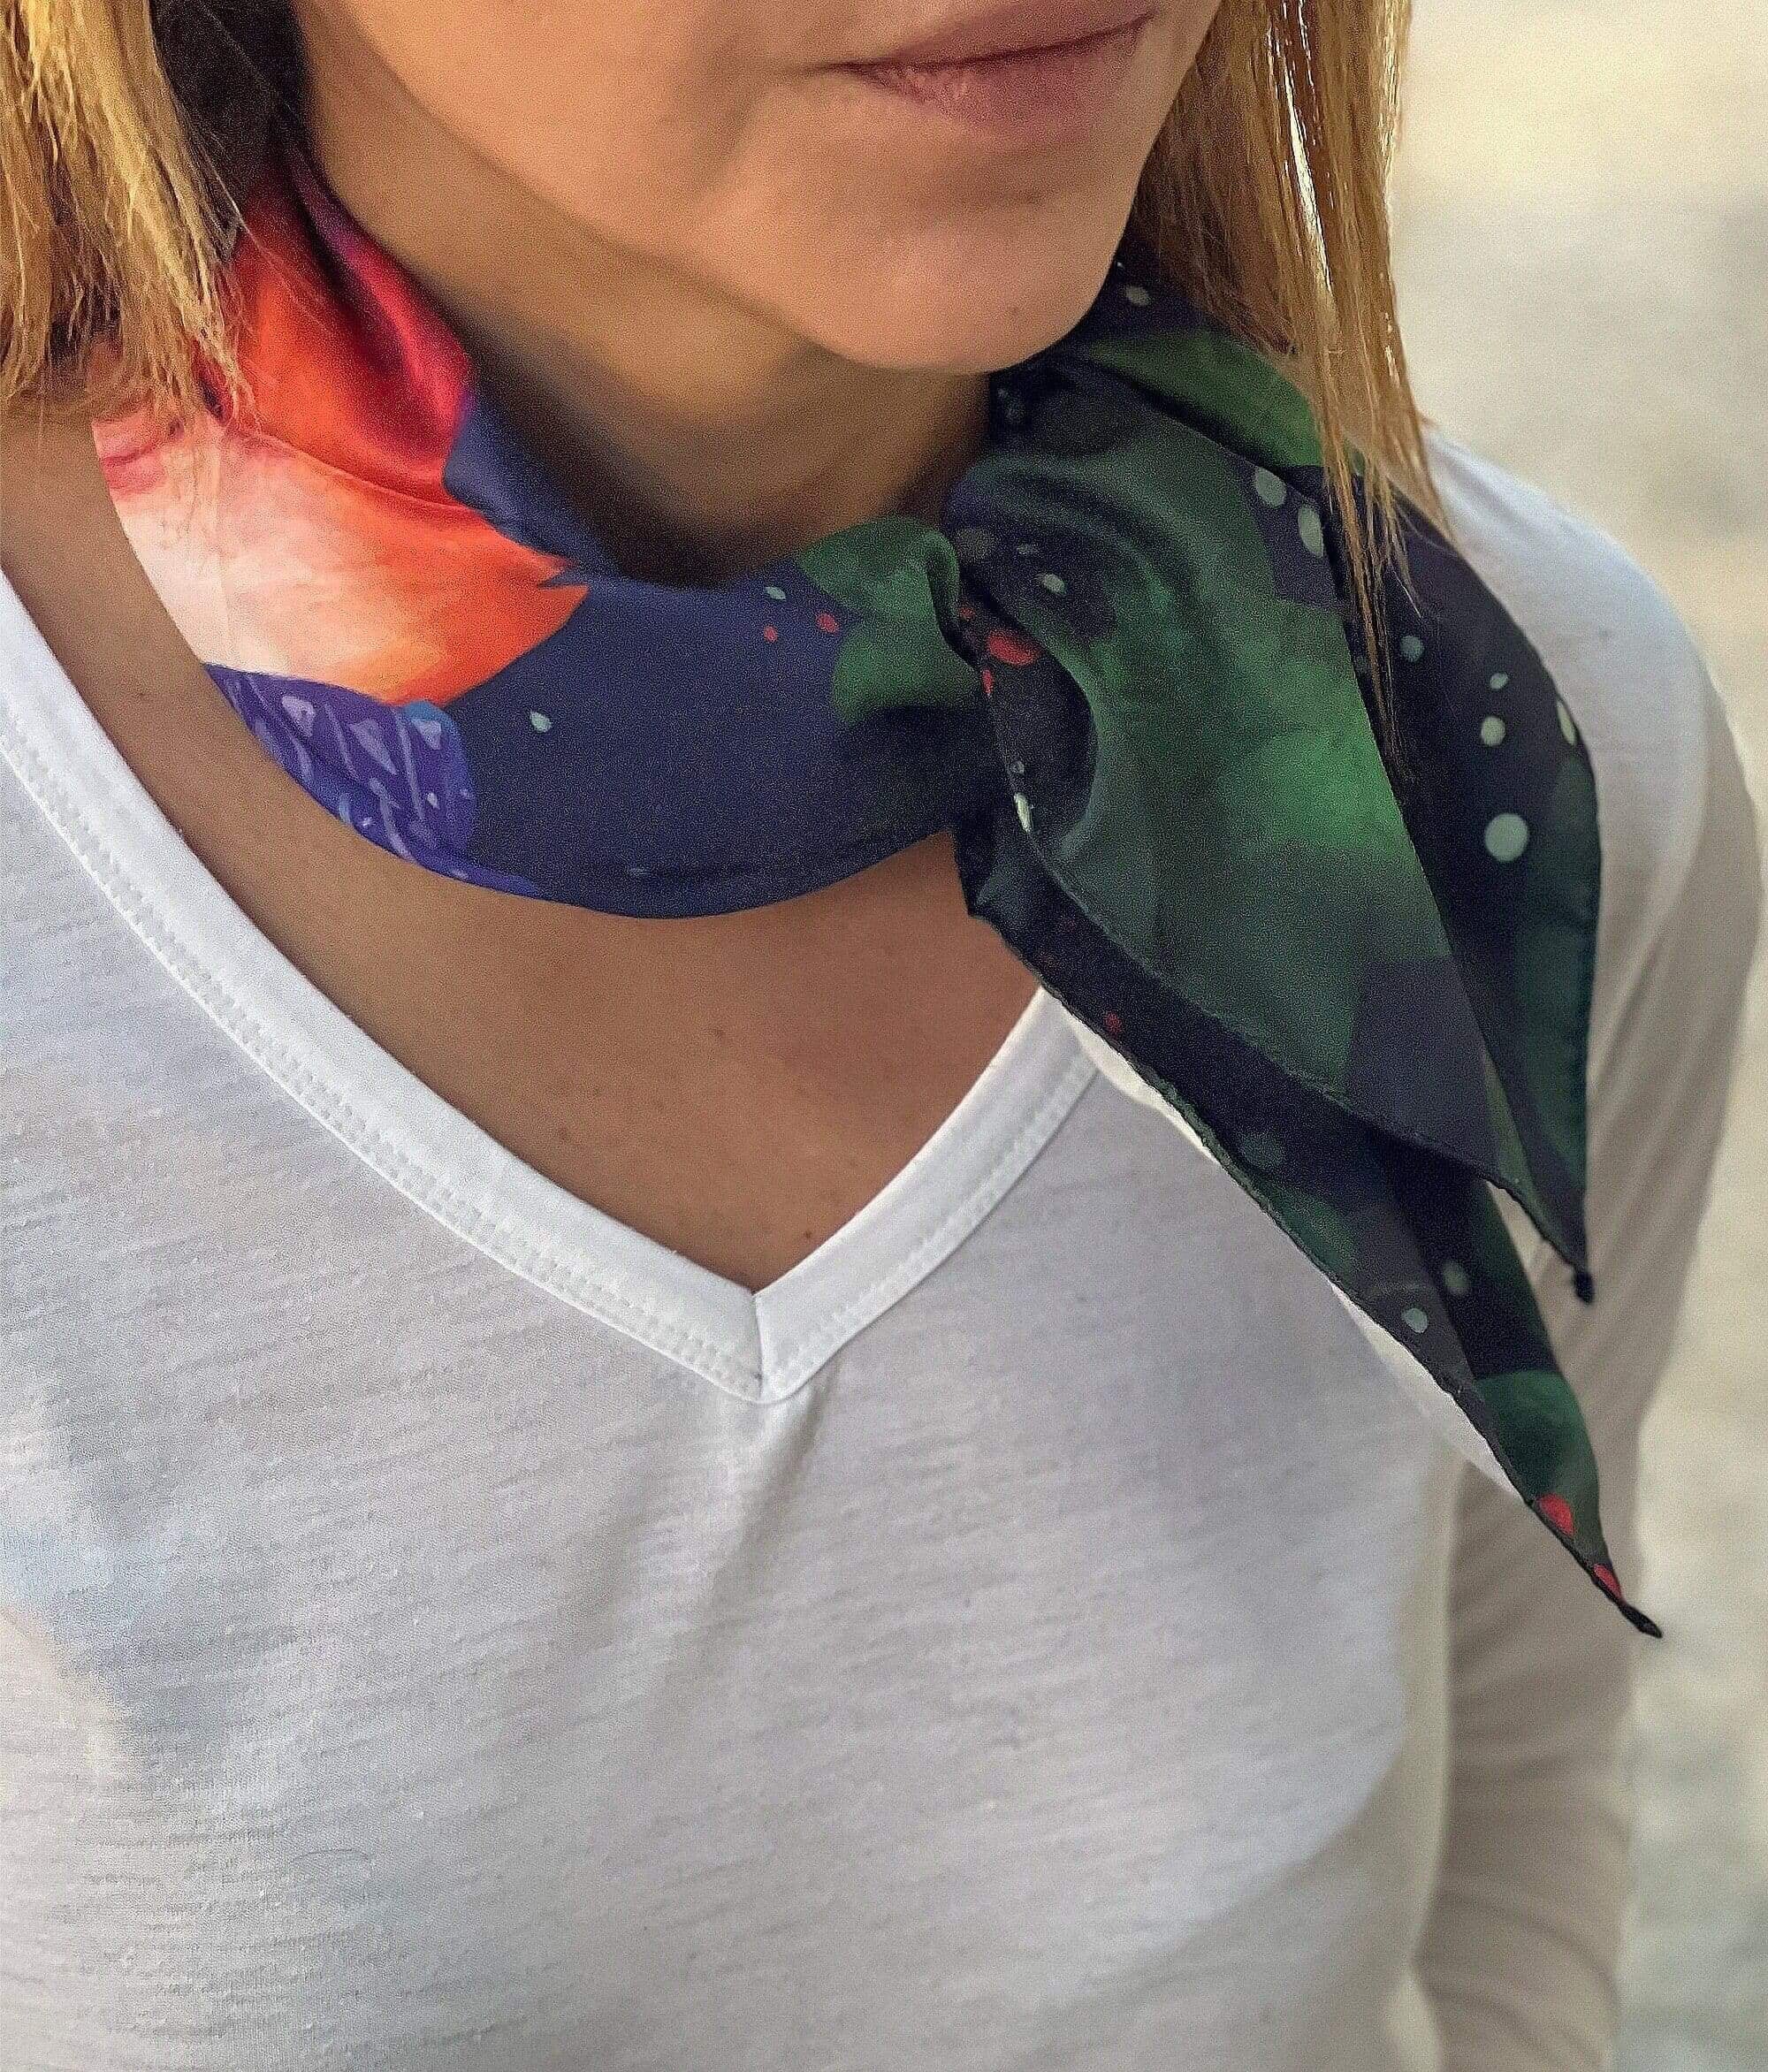 Make fashion statements both indoors and outdoors this winter with our satin hair scarf bandana. Featuring an intricate fox pattern, this accessory will add personality